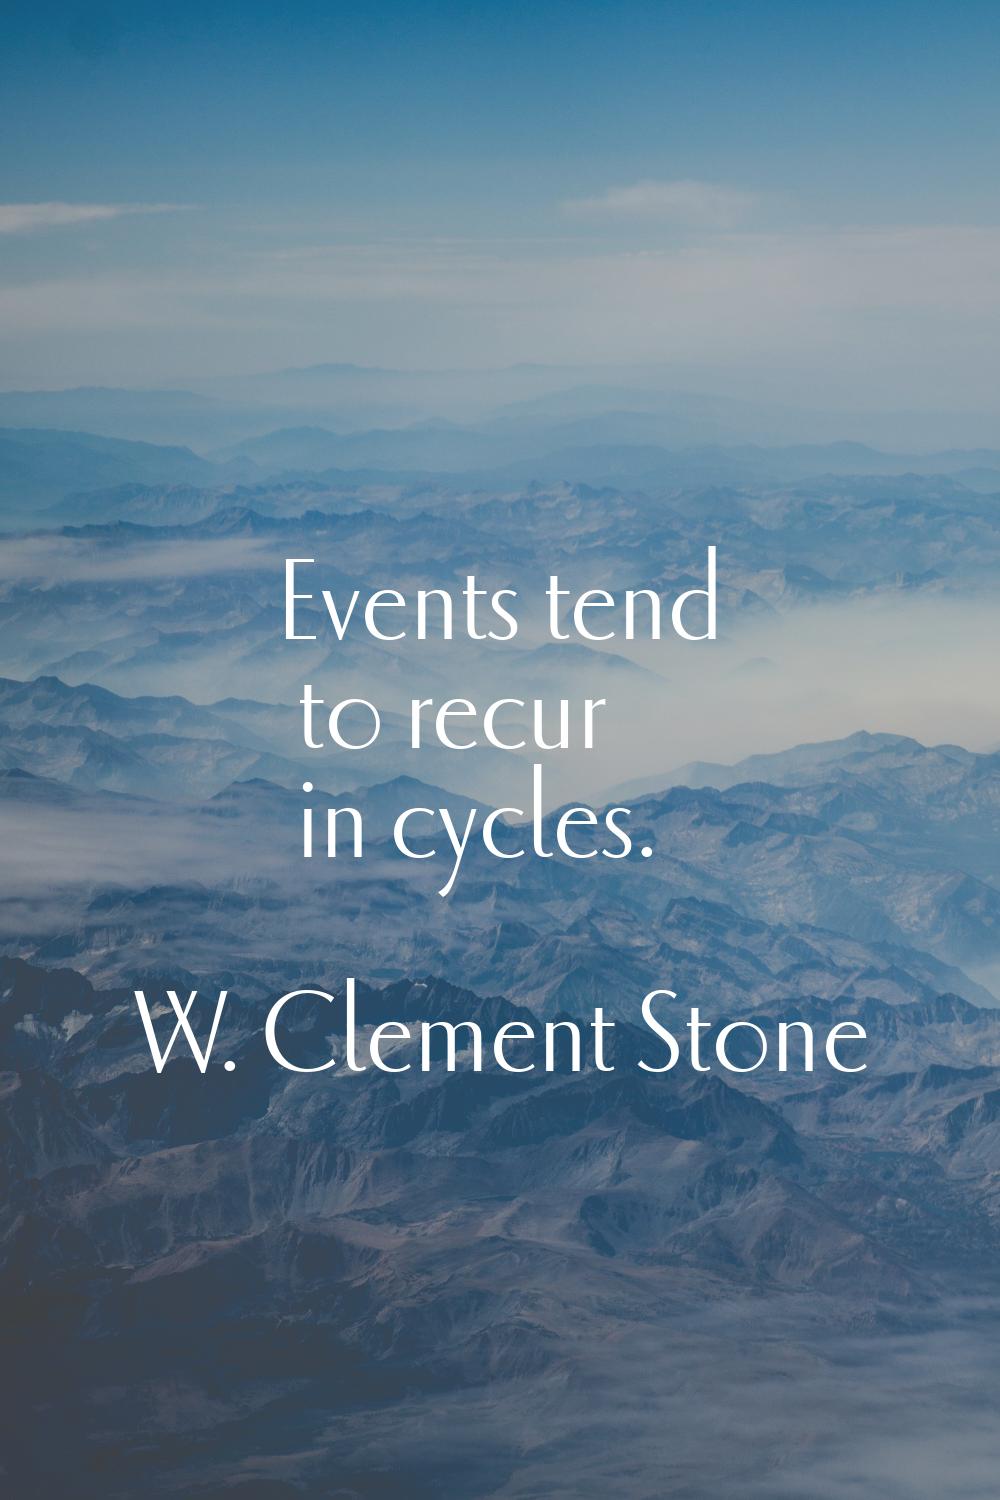 Events tend to recur in cycles.